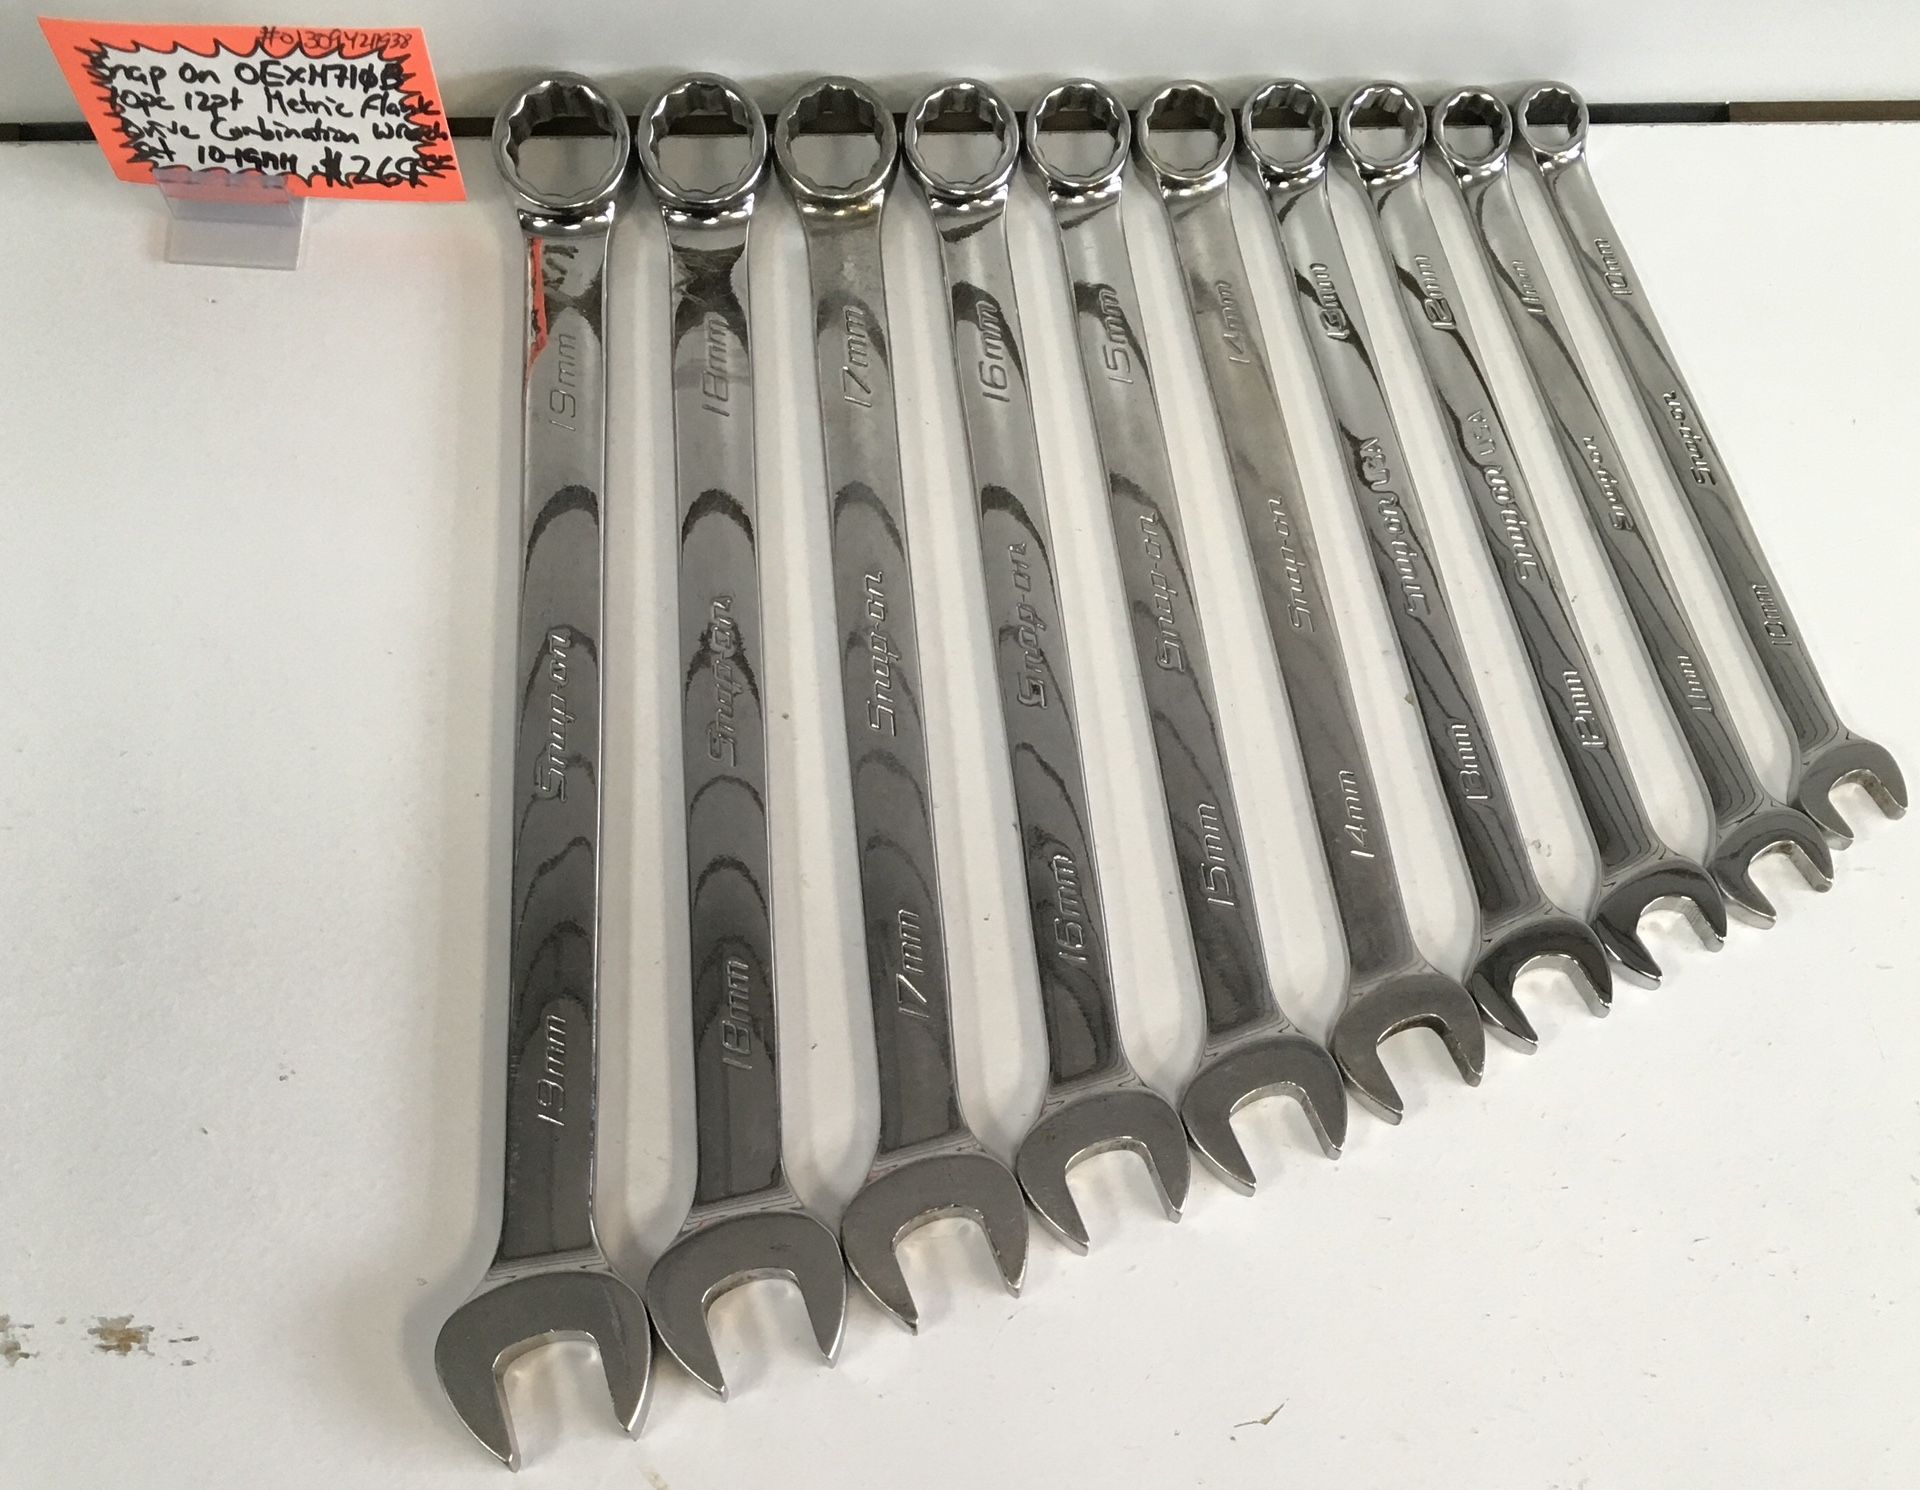 Snap On OEXM710B 10pc 12pt Metric Flank Drive Combination Wrench Set 10-19mm 